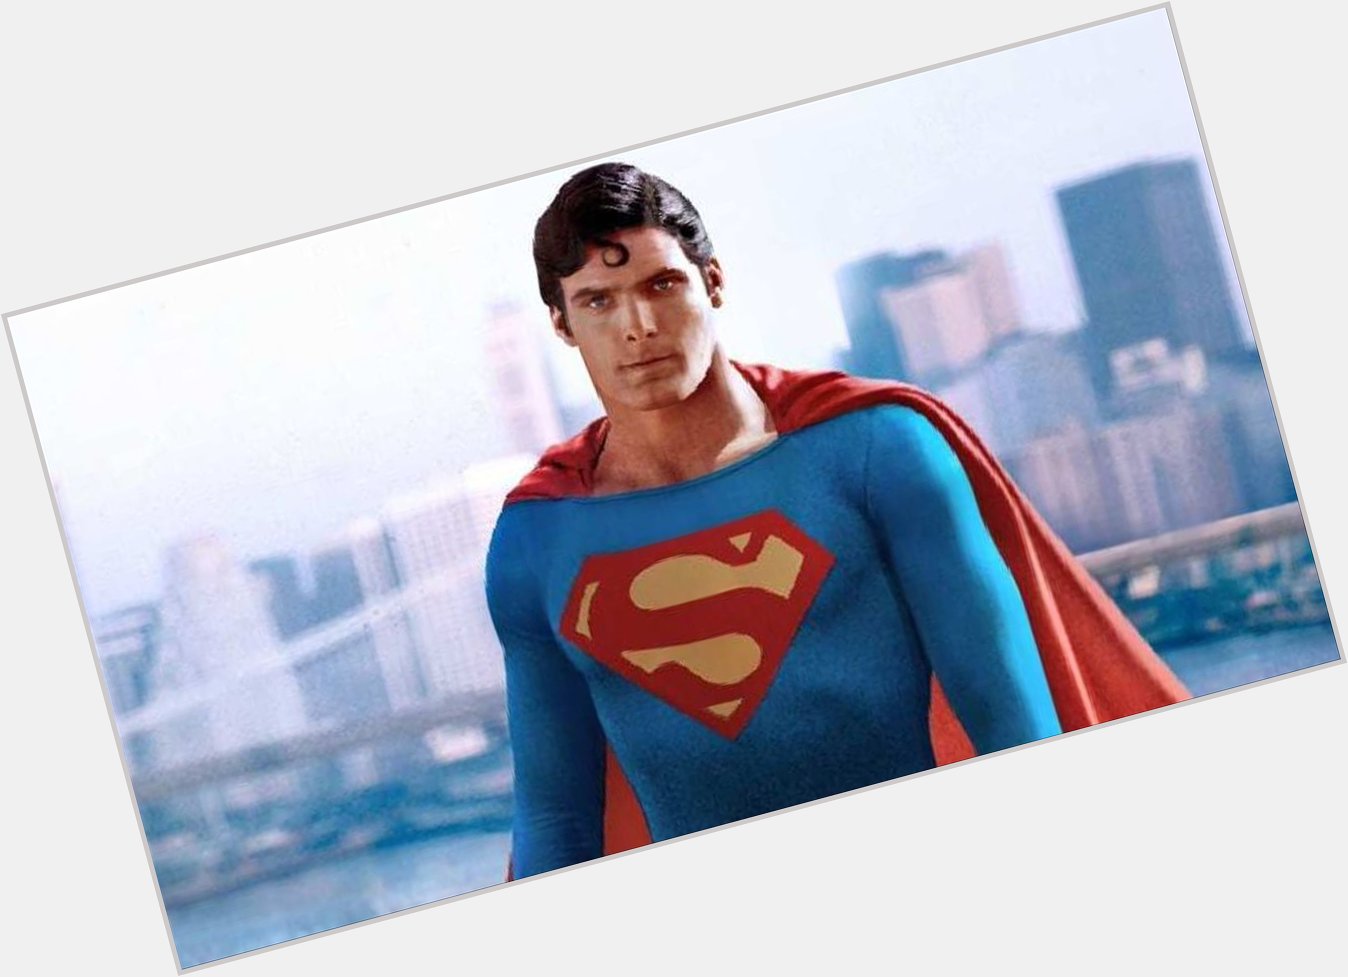 Happy birthday Christopher Reeve.  You live on in our hearts forever. Rest in peace and glory, great one. 